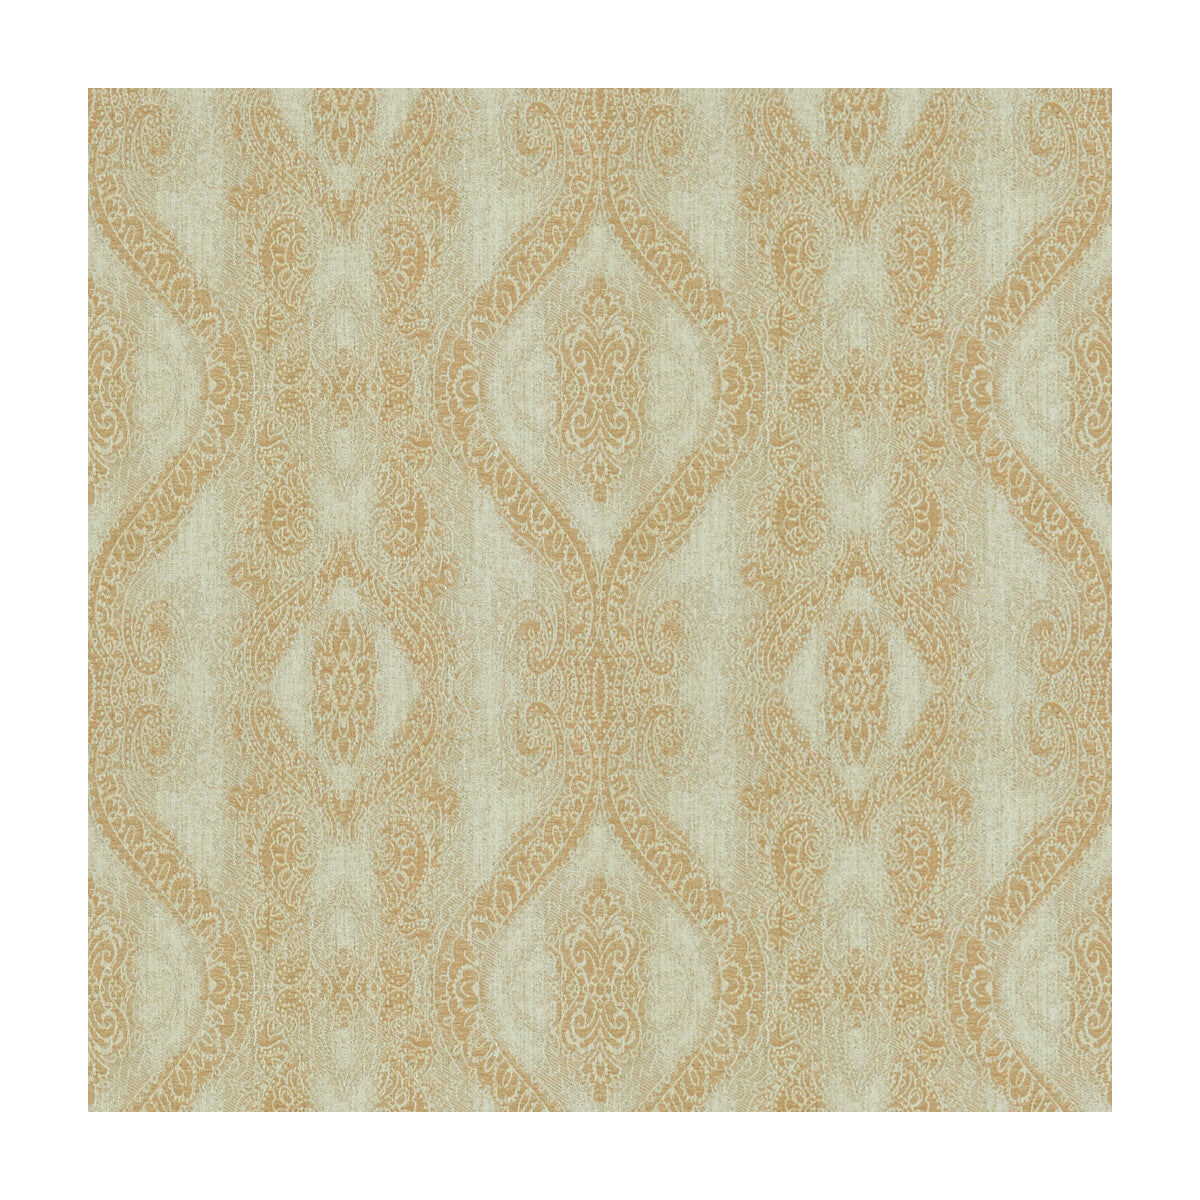 Kobuk fabric in sand color - pattern 34162.16.0 - by Kravet Design in the Candice Olson collection